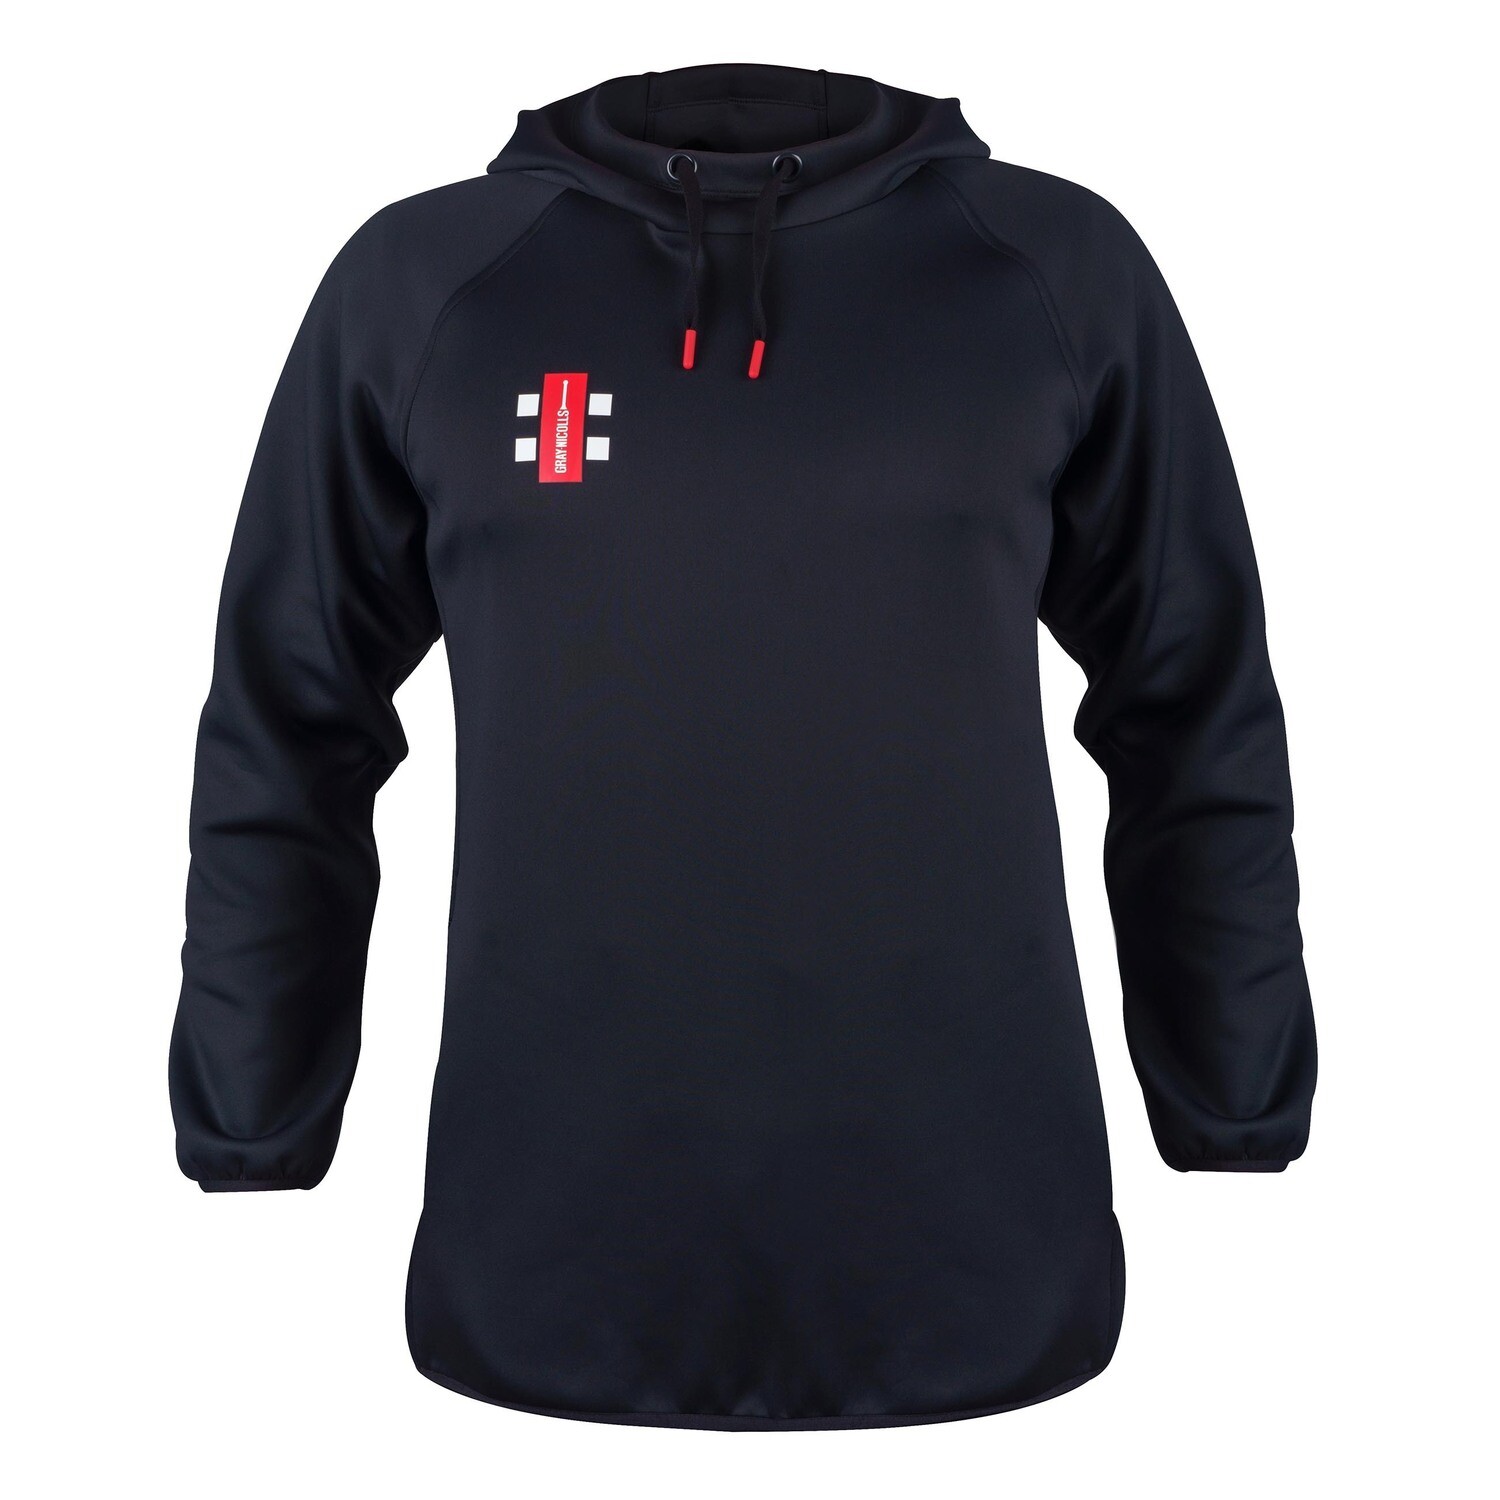 Billingham Synthonia Pro Performance V2 Pull Over Hooded Top Adult